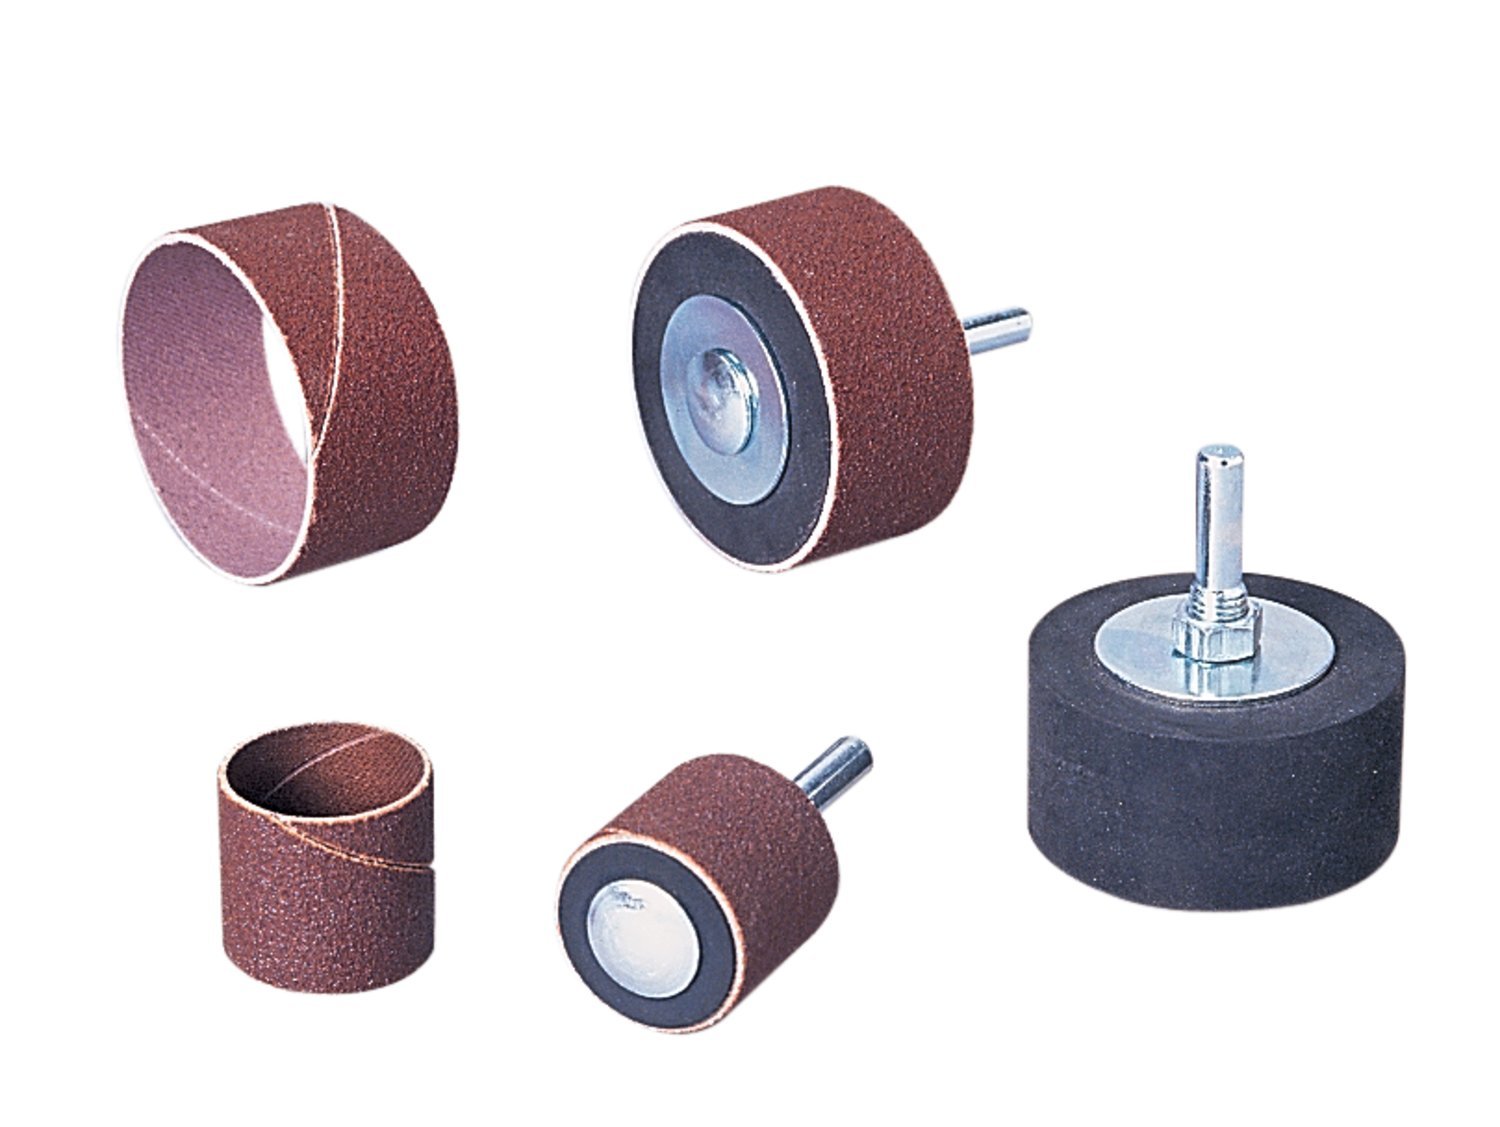 7010369172 - Standard Abrasives A/O Spiral Band 712924, 3/4 in x 1-1/2 in 40, 100
ea/Case